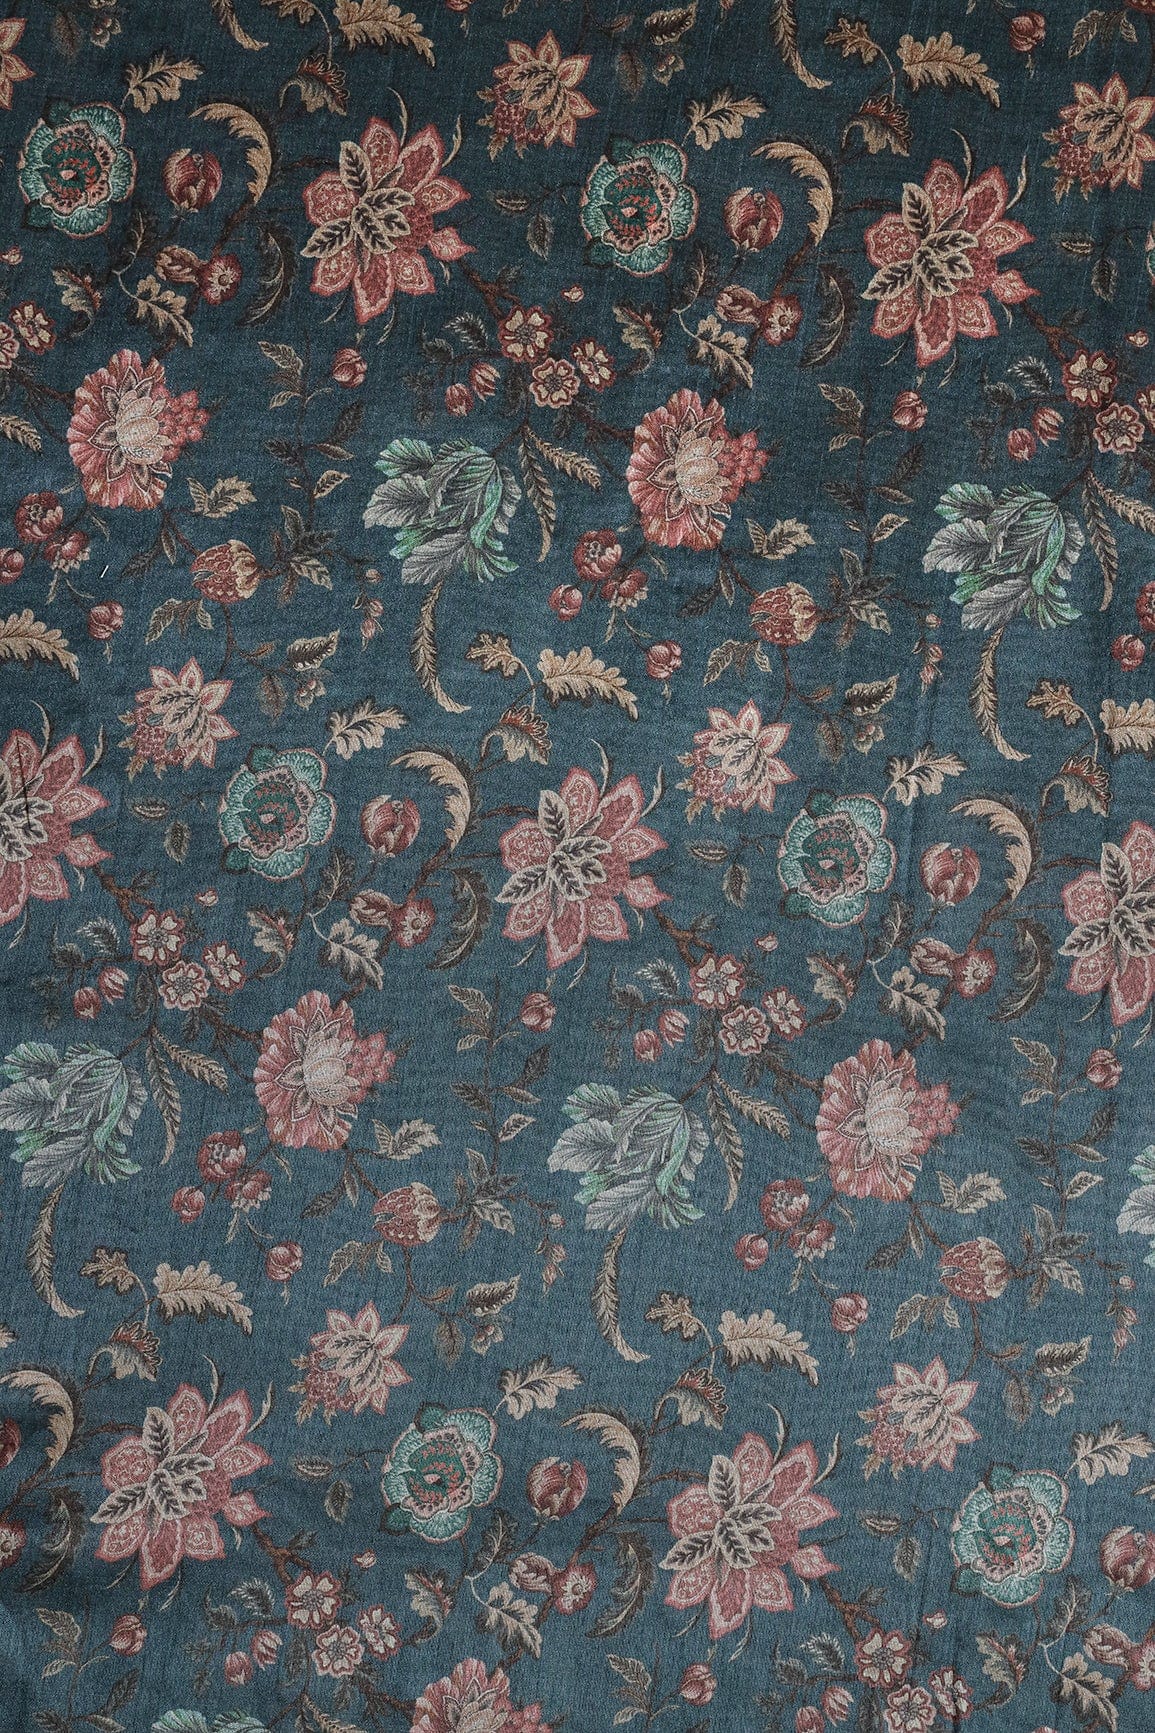 doeraa Prints Pink Floral Pattern Digital Print On Air Force Blue Mulberry Silk Fabric